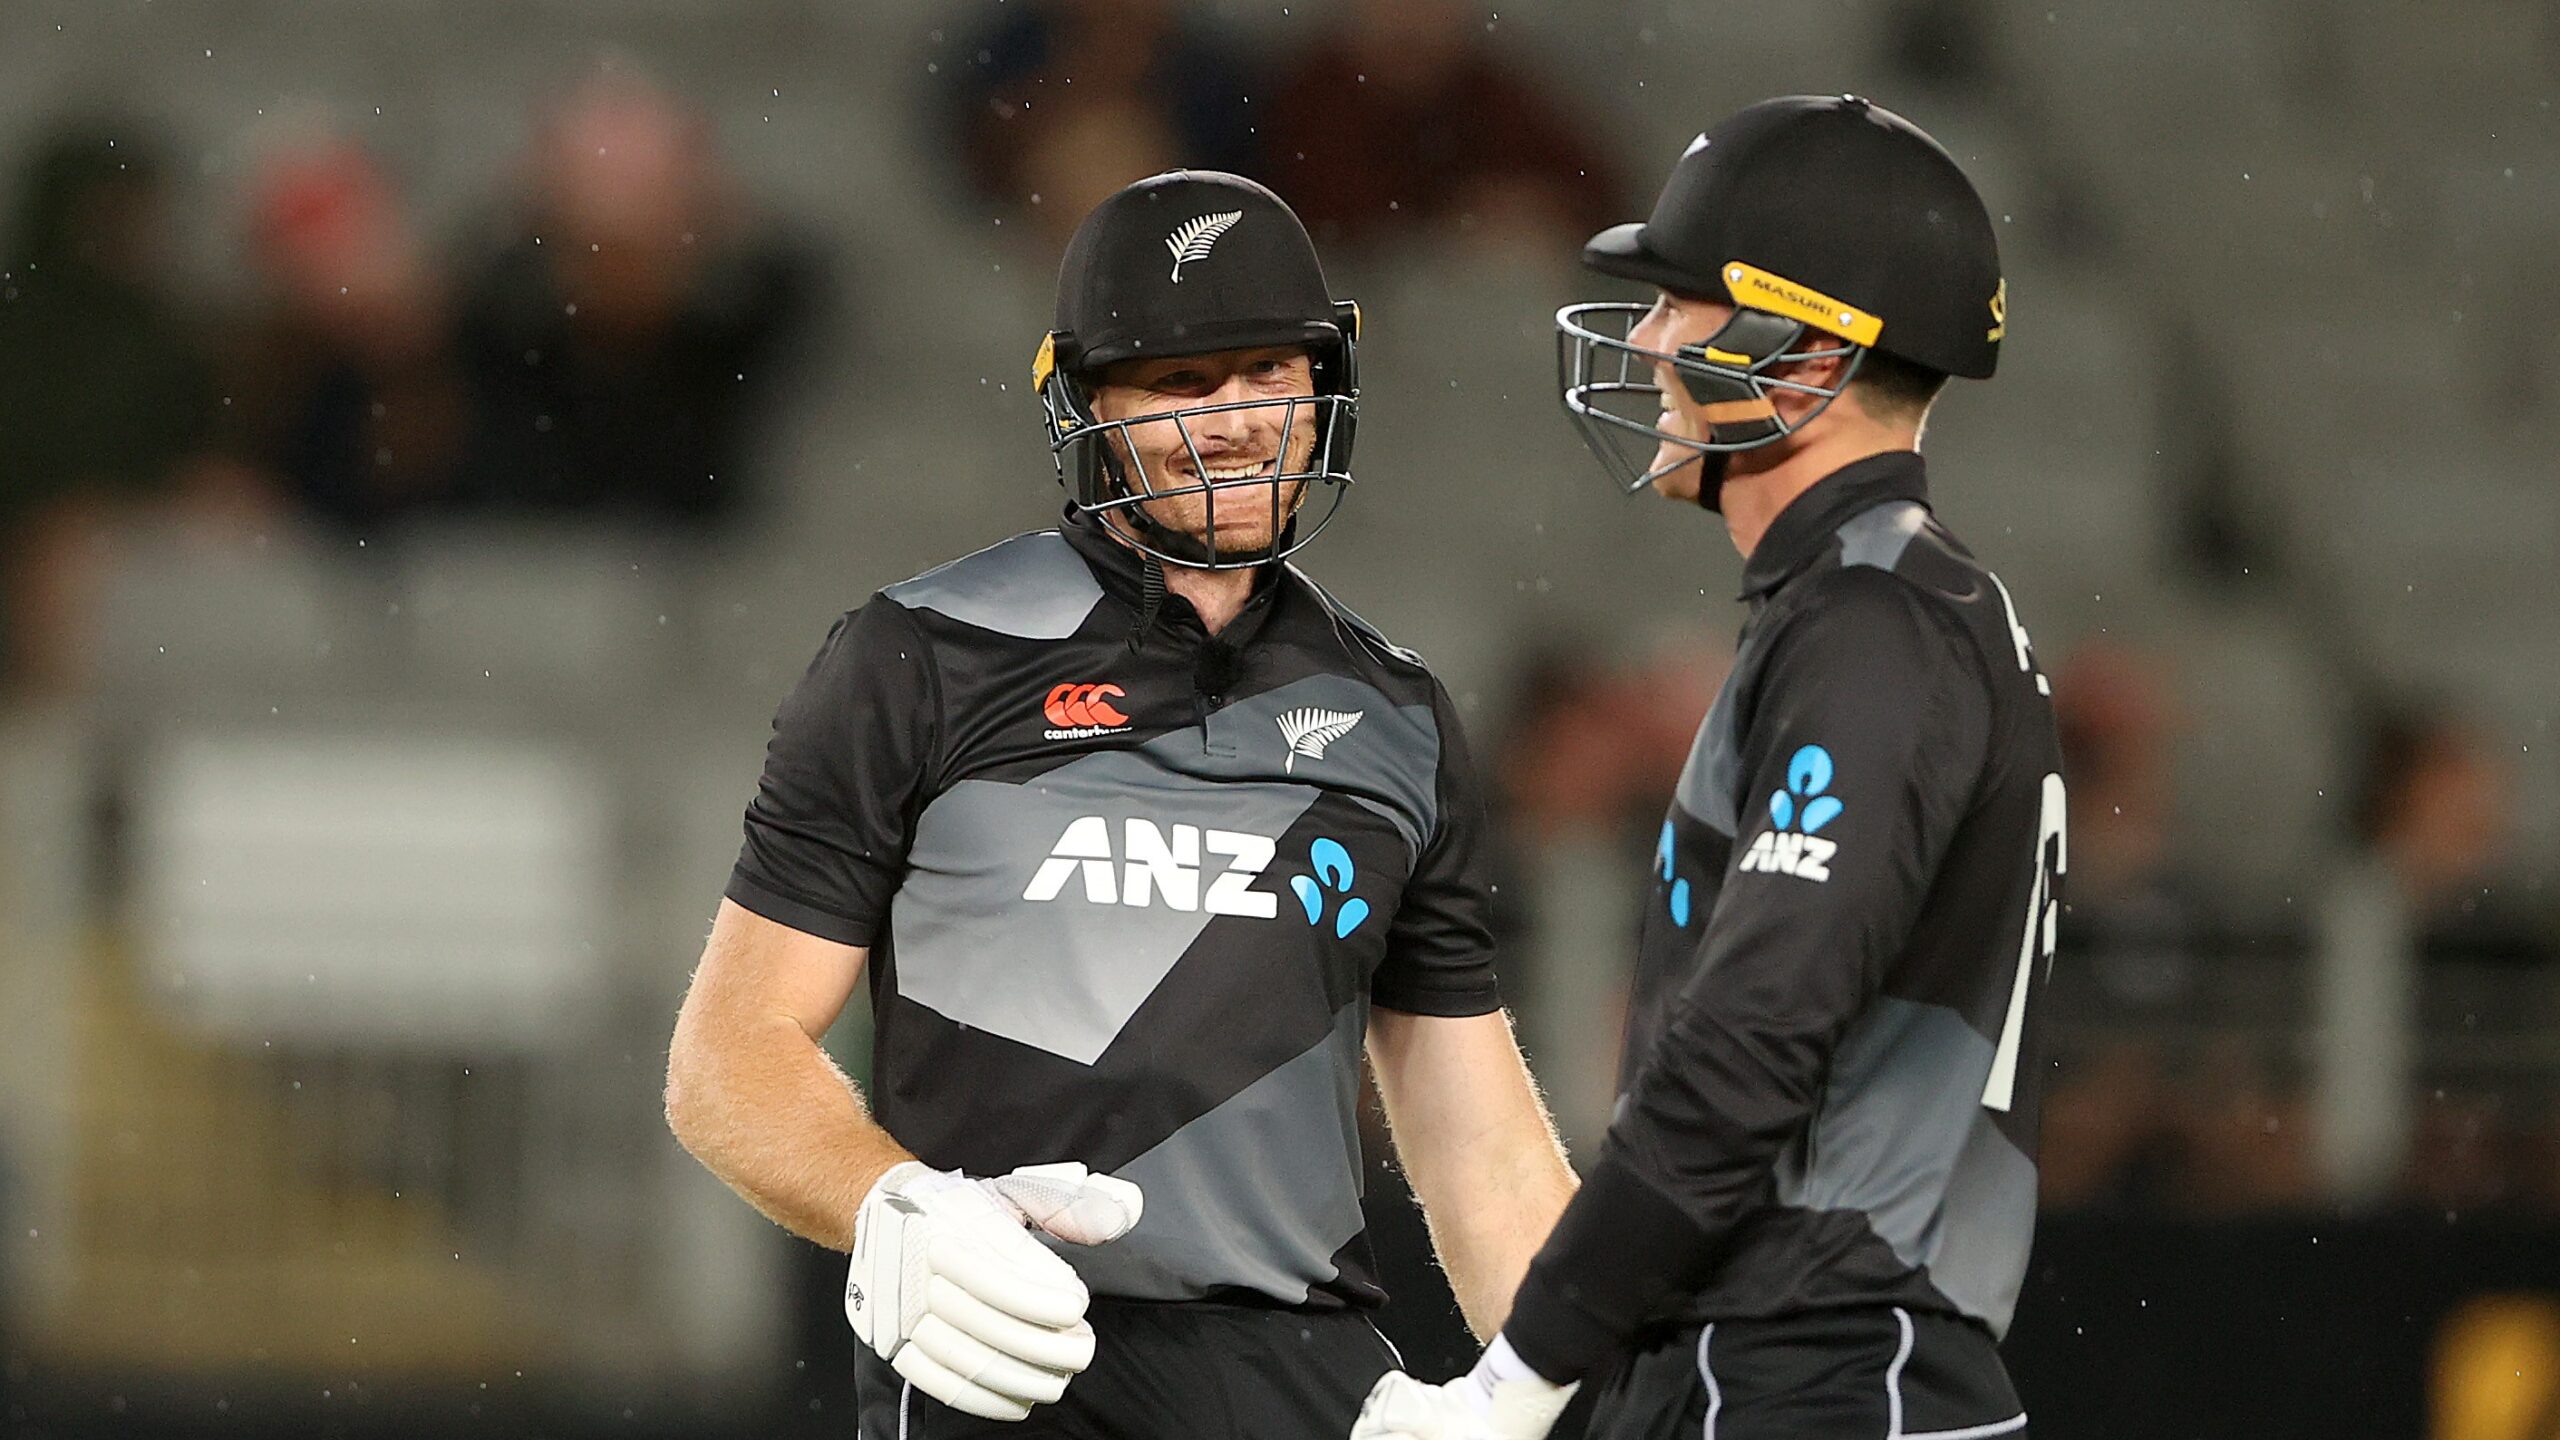 Bangladesh vs New Zealand 2021: Finn Allen Will Return To The Squad After Testing Twice Negative For COVID-19